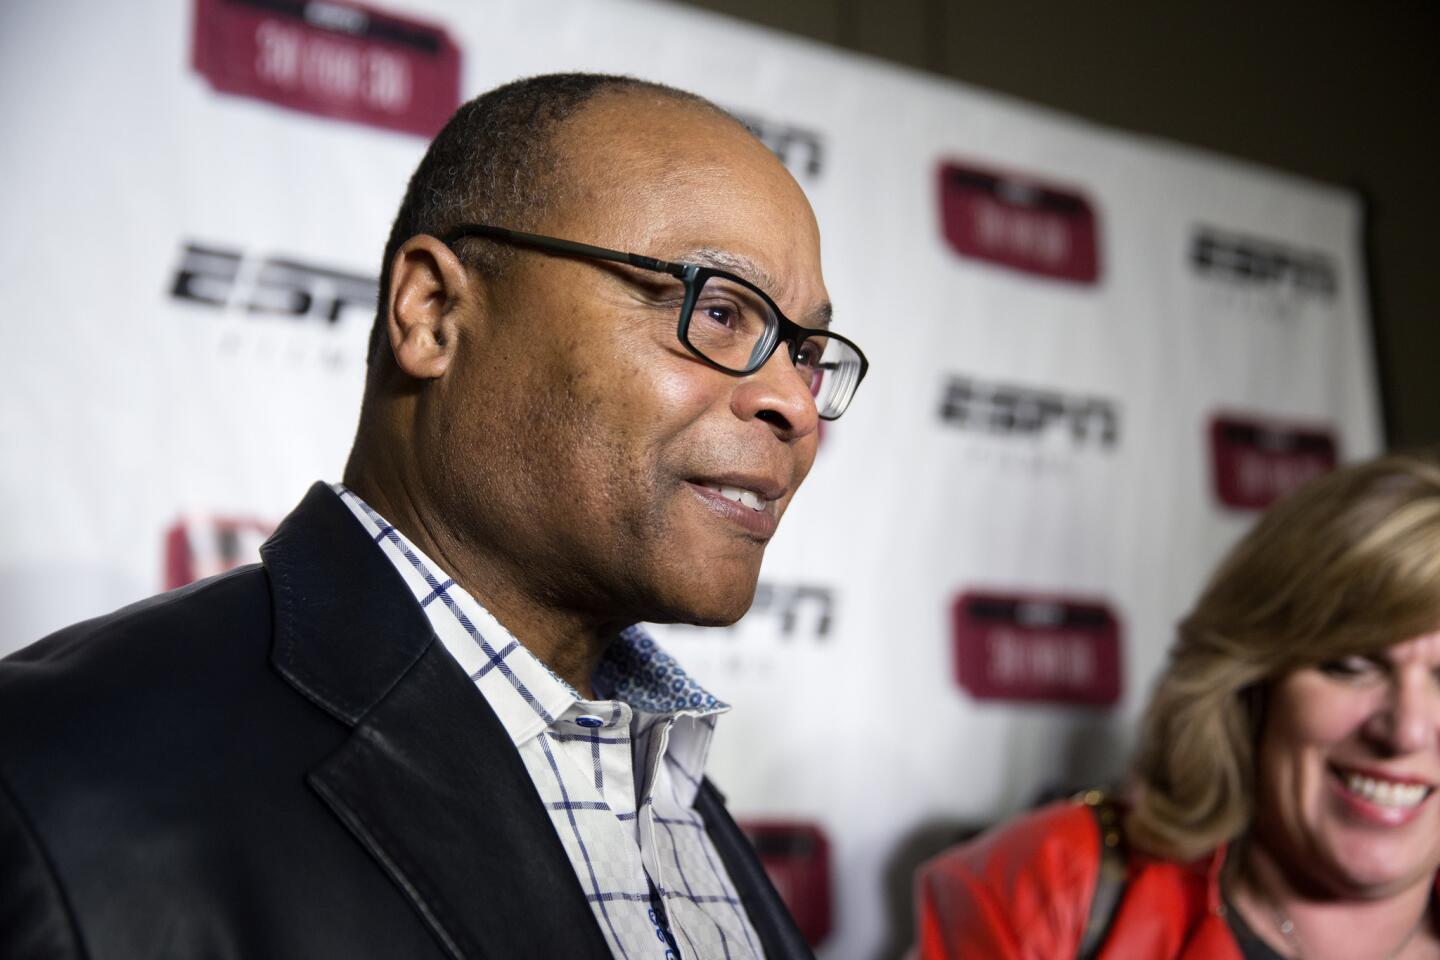 Mike Singletary arrives at an advanced screening of "The '85 Bears" documentary about the Super Bowl XX champions Wednesday, Jan. 27, 2016, at the AMC River East 21 in Chicago. This year marks the 30th anniversary of the Bears' win.